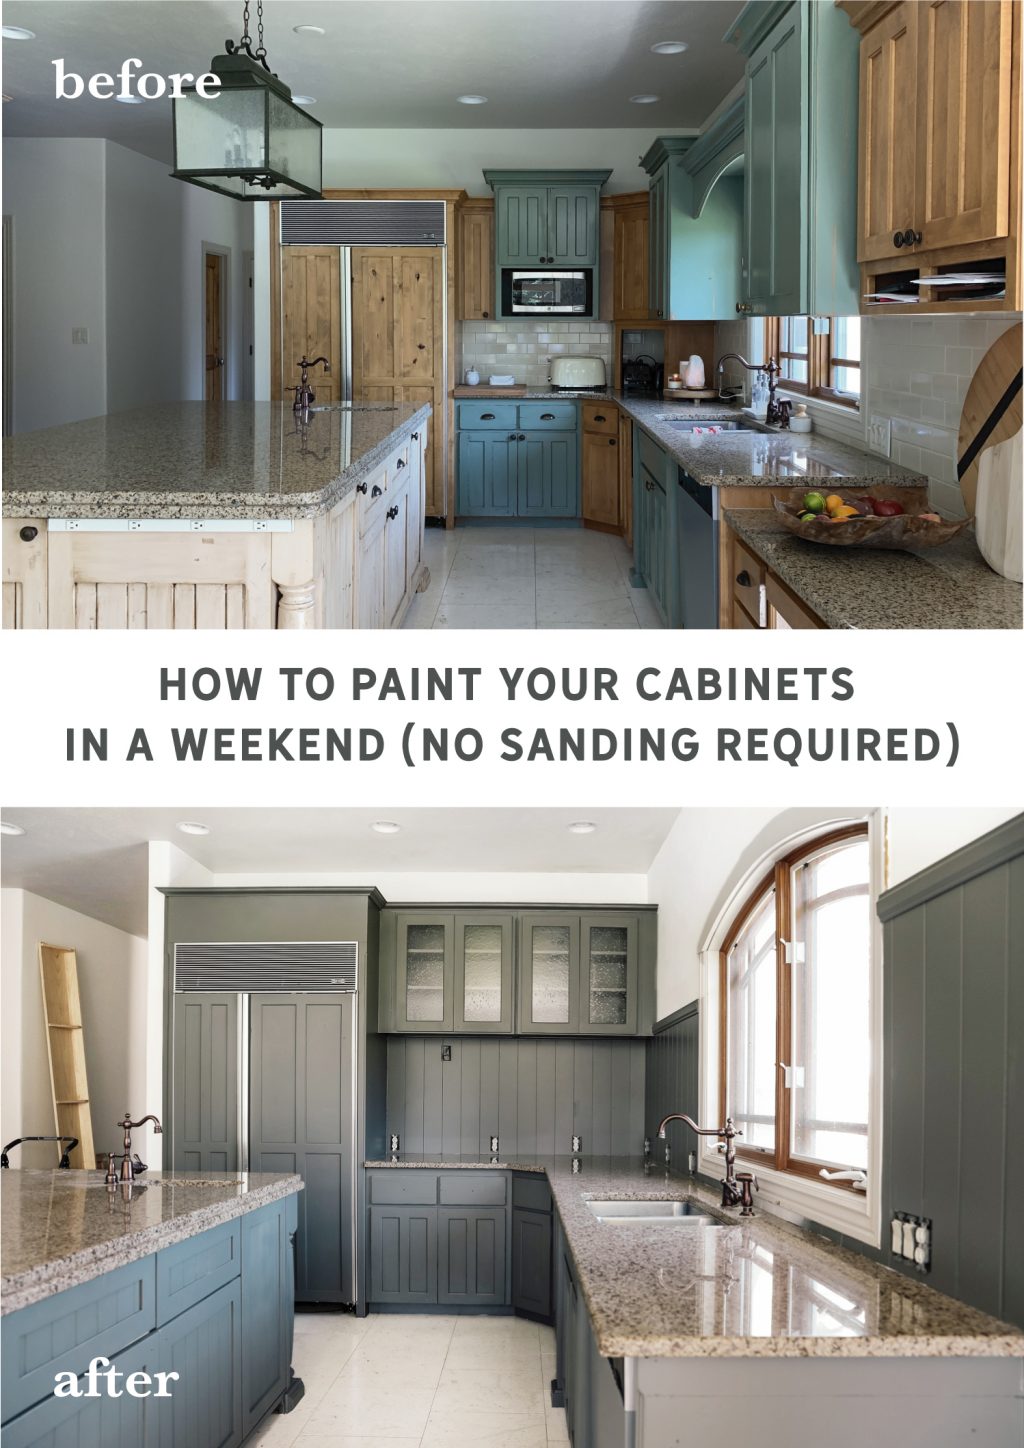 How To Paint Your Cabinets In A Weekend, Best Paint To Cabinets Without Sanding